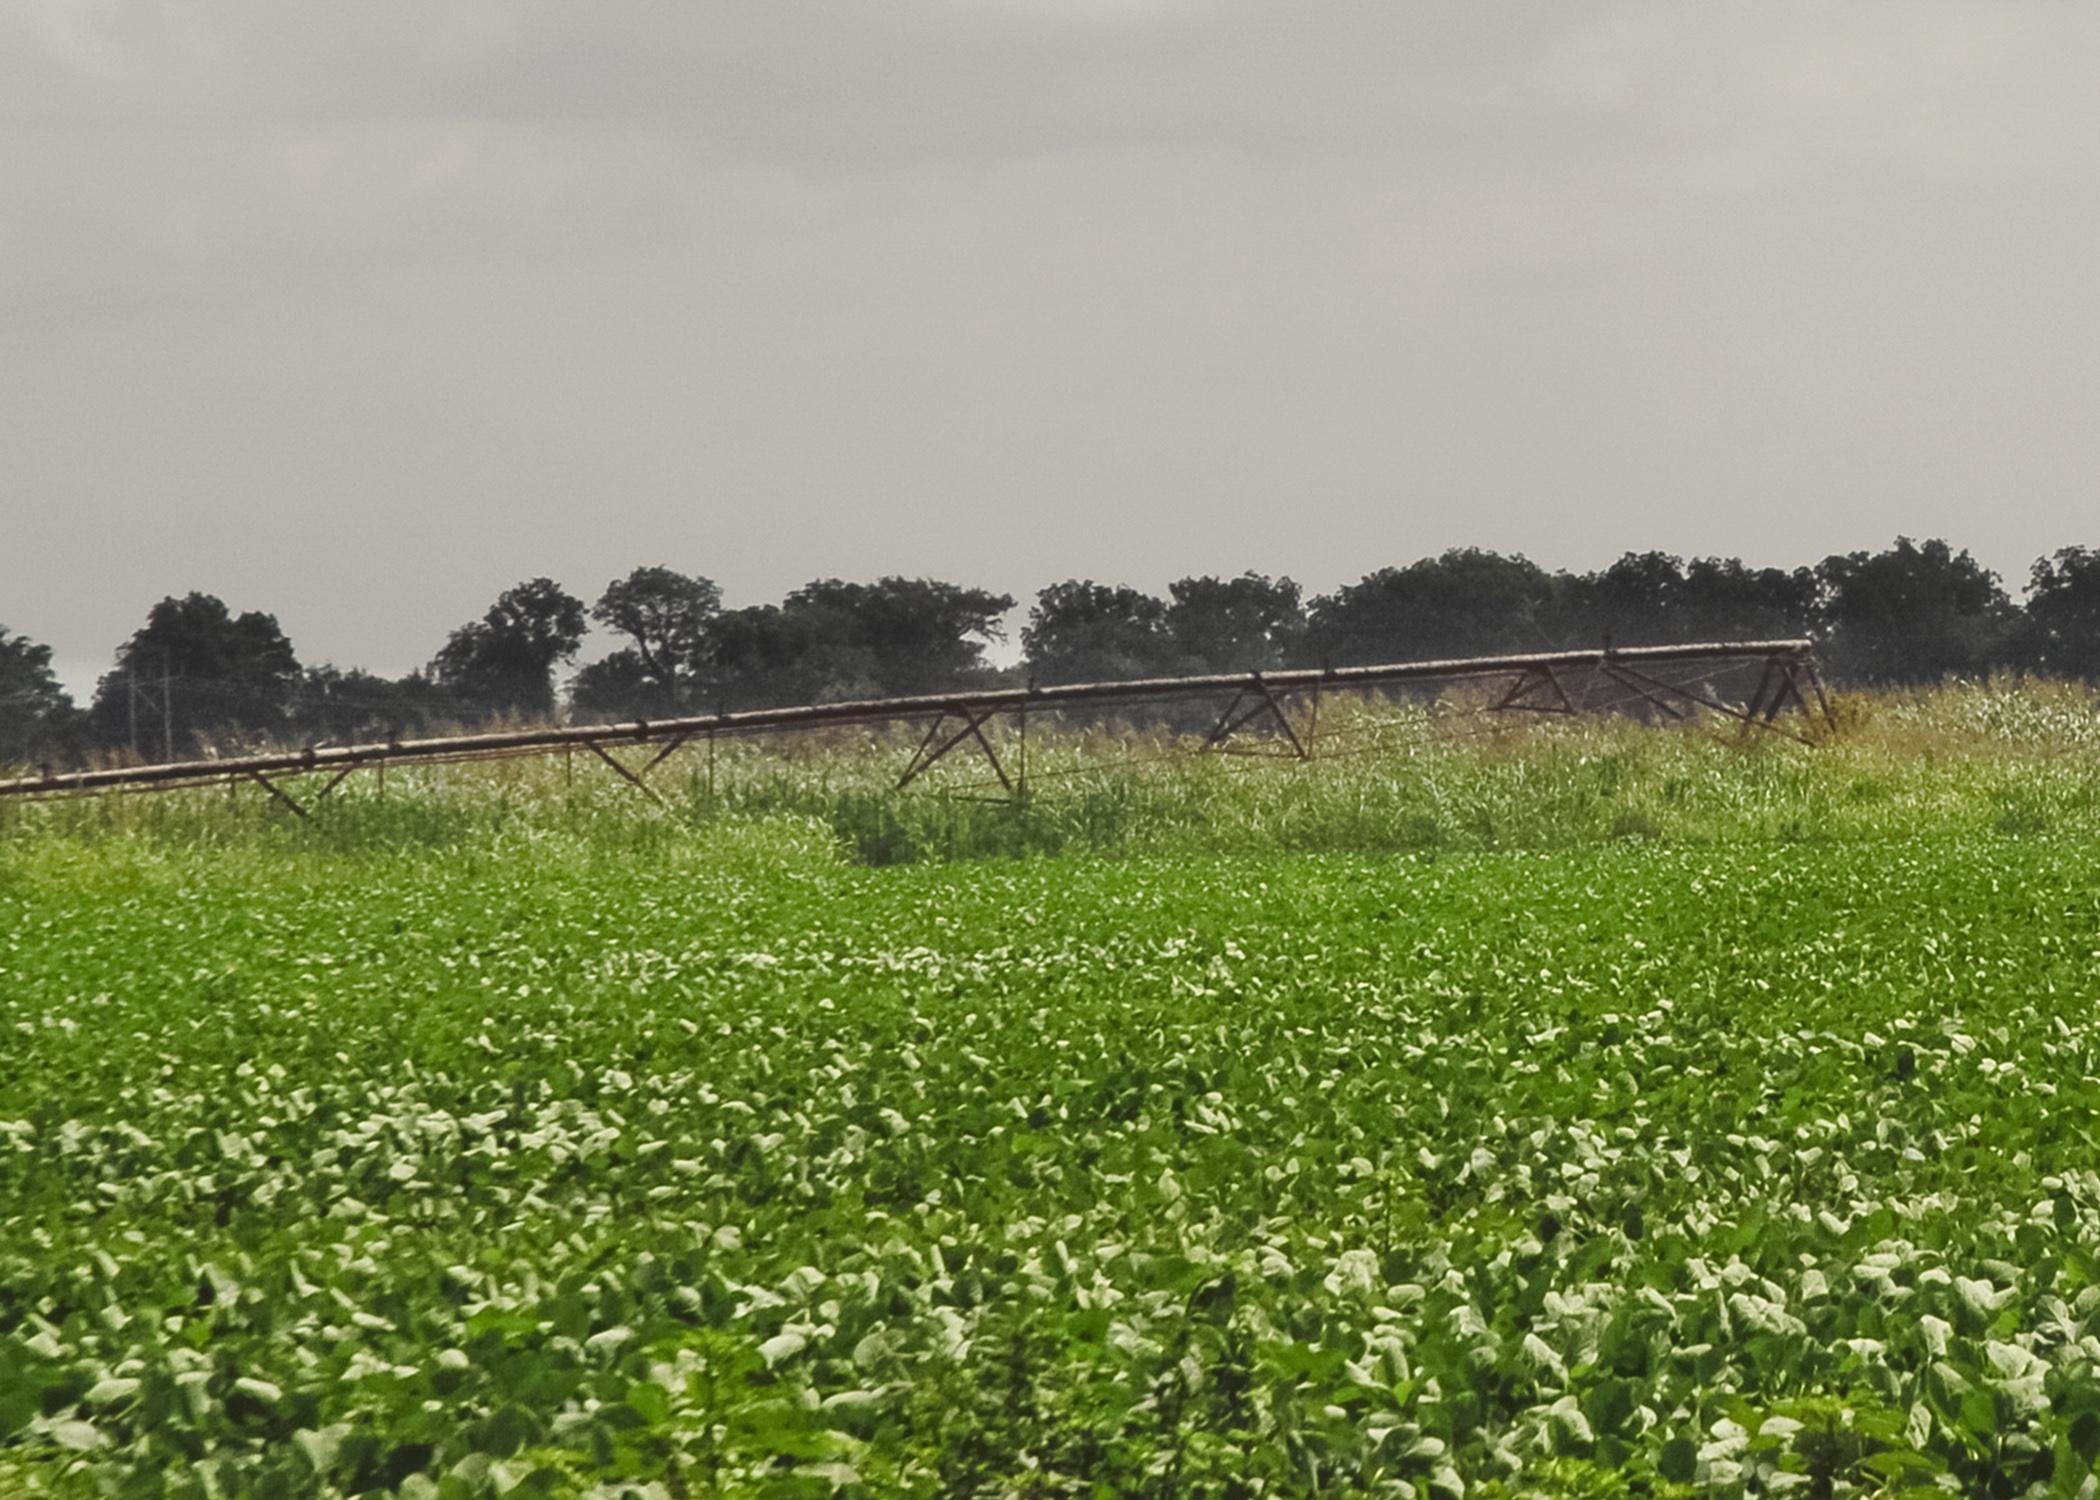 Across the Delta, many producers are abandoning pivot-irrigation systems for furrow irrigation. This unused system sat rusting near Highway 82 in Leland, Mississippi, on June 18, 2014. (Photo by MSU Ag Communications/Bonnie Coblentz)